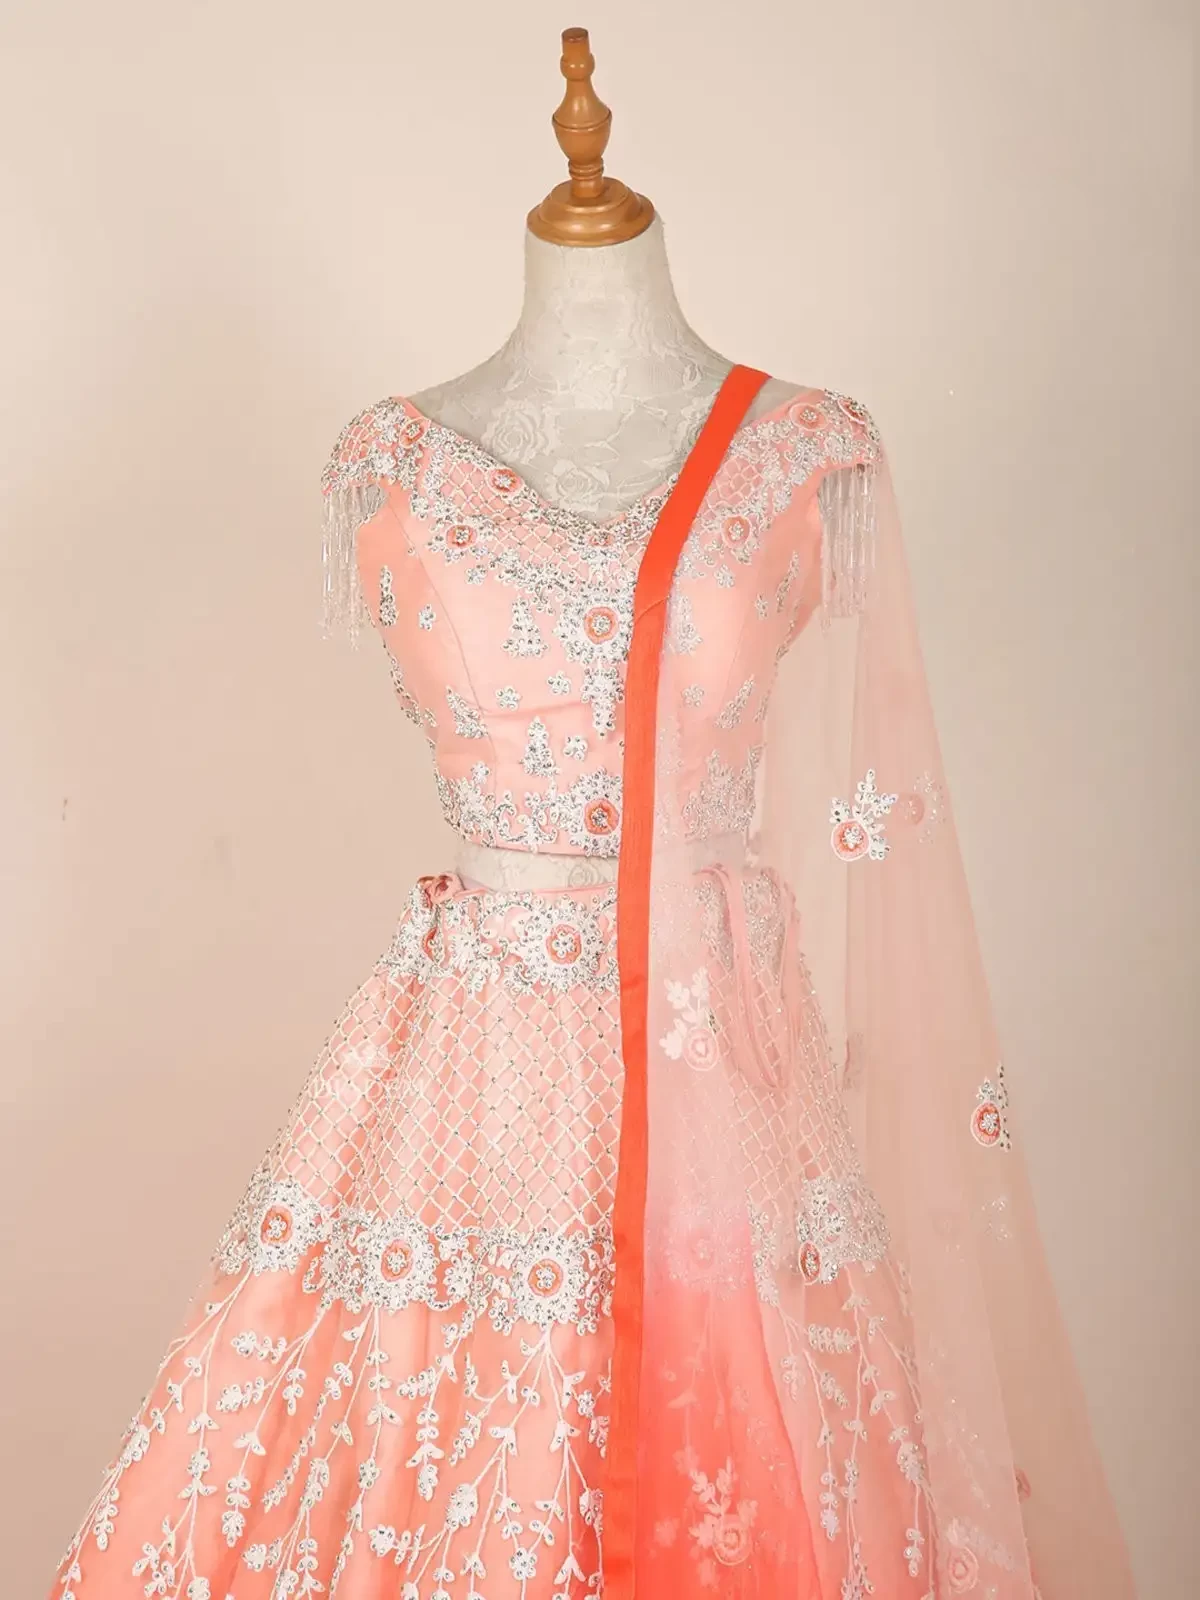 Orange Ombre Lehenga Adorned In Floral Stones And Laces With Dupatta